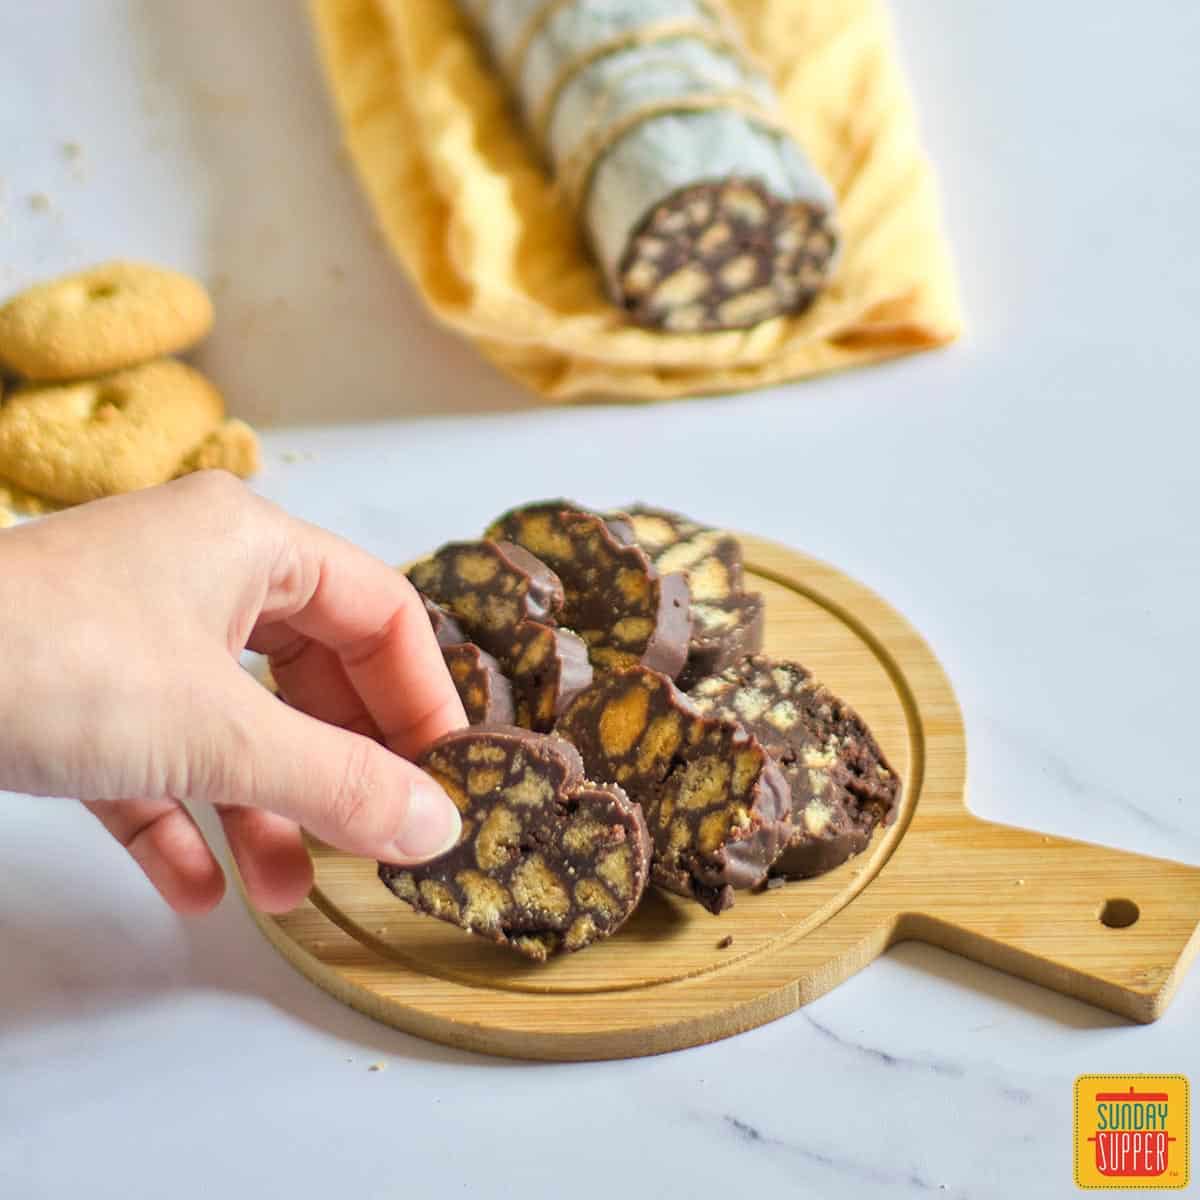 Chocolate salami cut into slices on a small wooden board